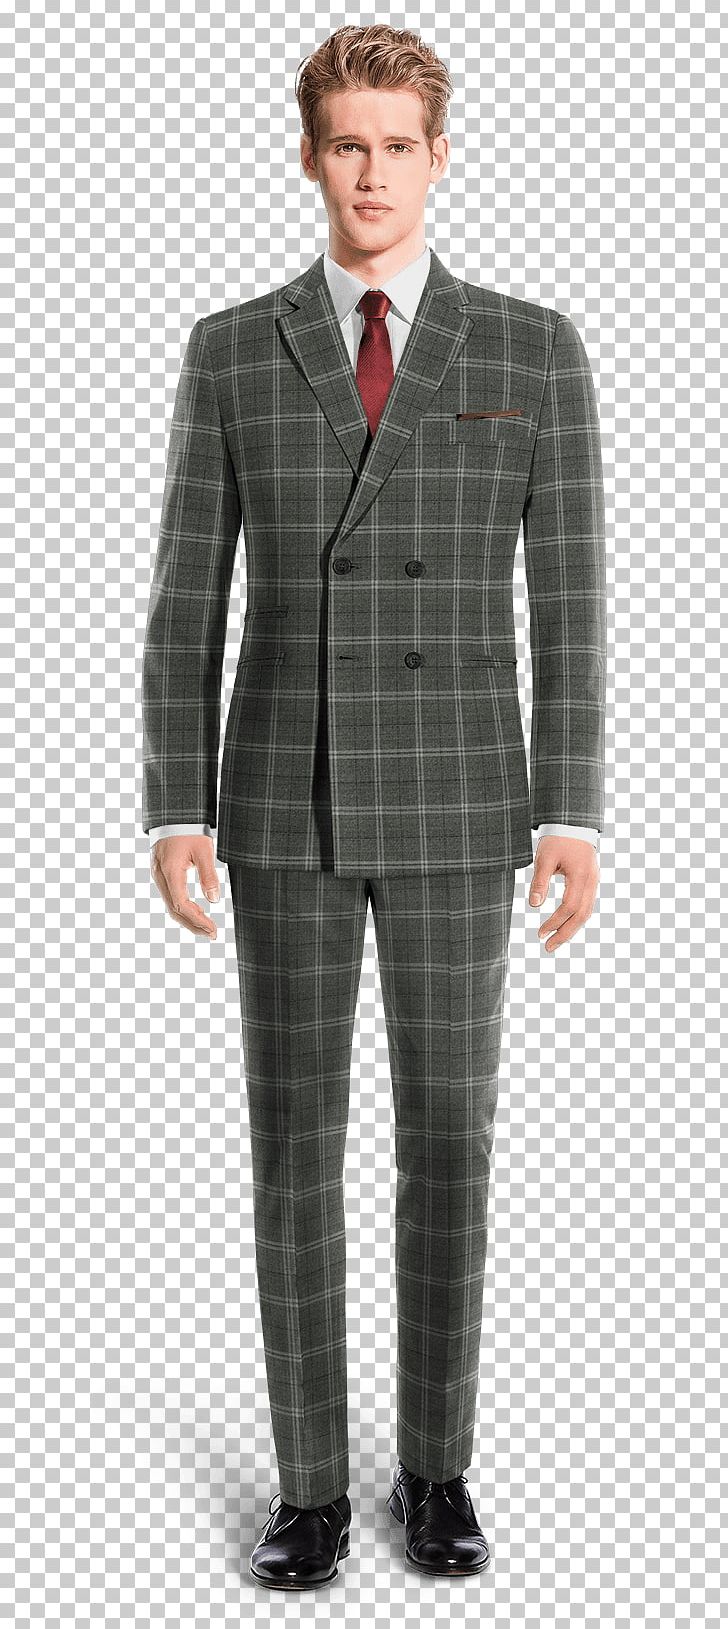 Suit Pants Tuxedo Wool Double-breasted PNG, Clipart, Businessperson, Chino Cloth, Clothing, Costume Homme, Doublebreasted Free PNG Download